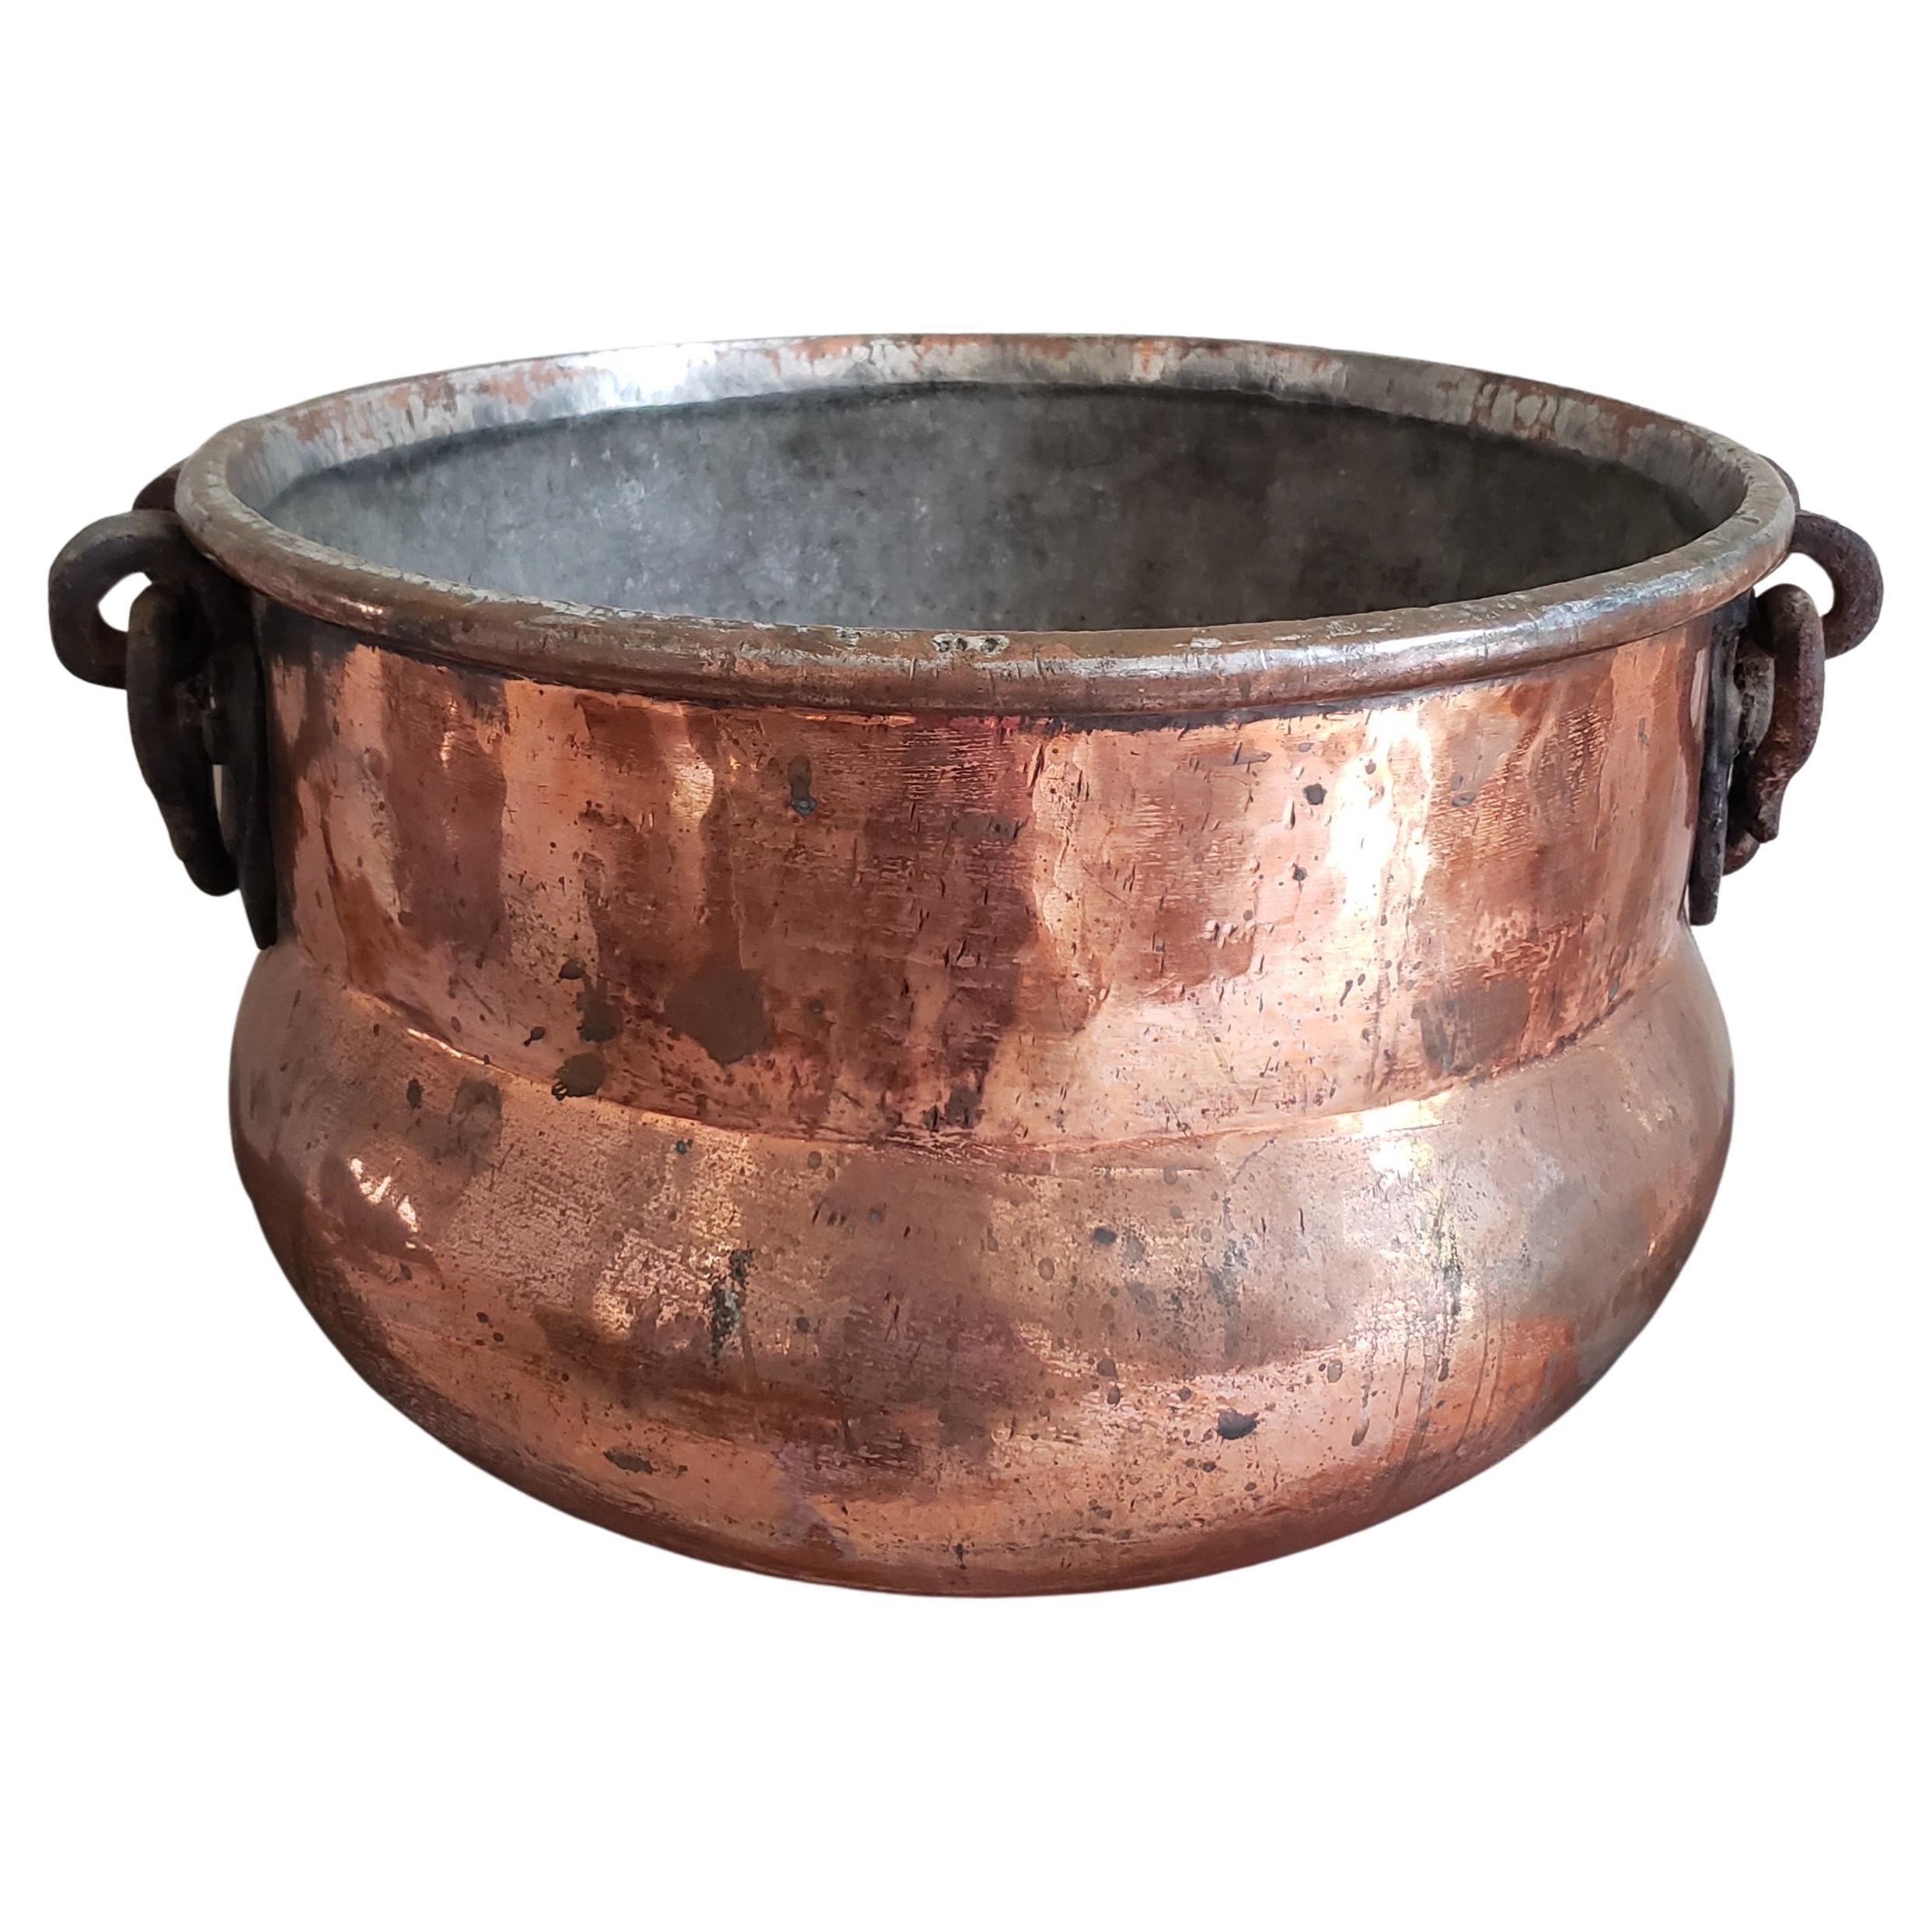 A large, heavy duty hand hammered jardiniere, planter in solid copper with iron drop down handles. Very good antique condition.
Measures 19